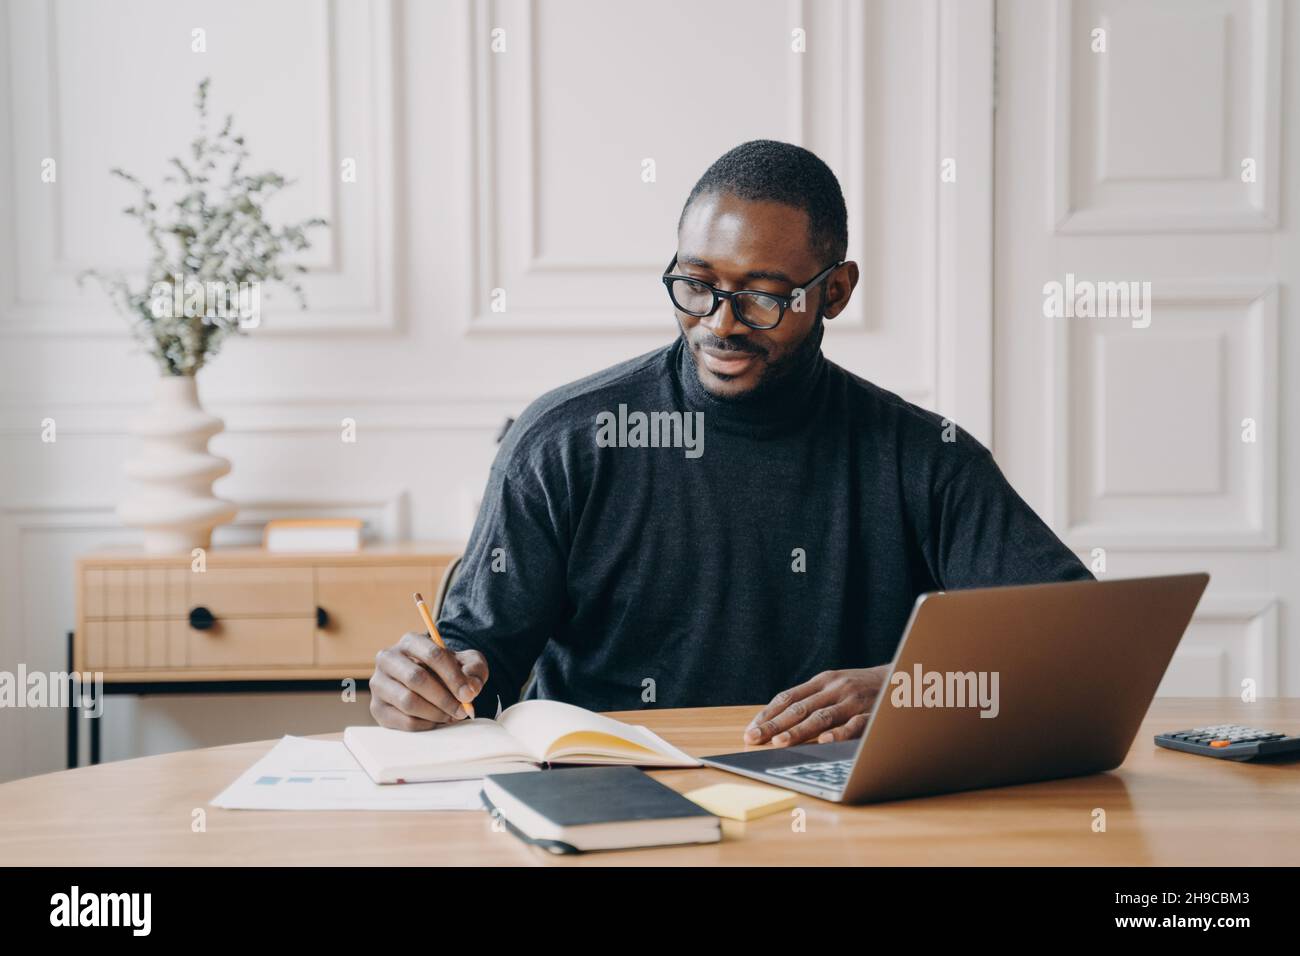 Focused young african american businessman writing down notes in notebook while working in office Stock Photo